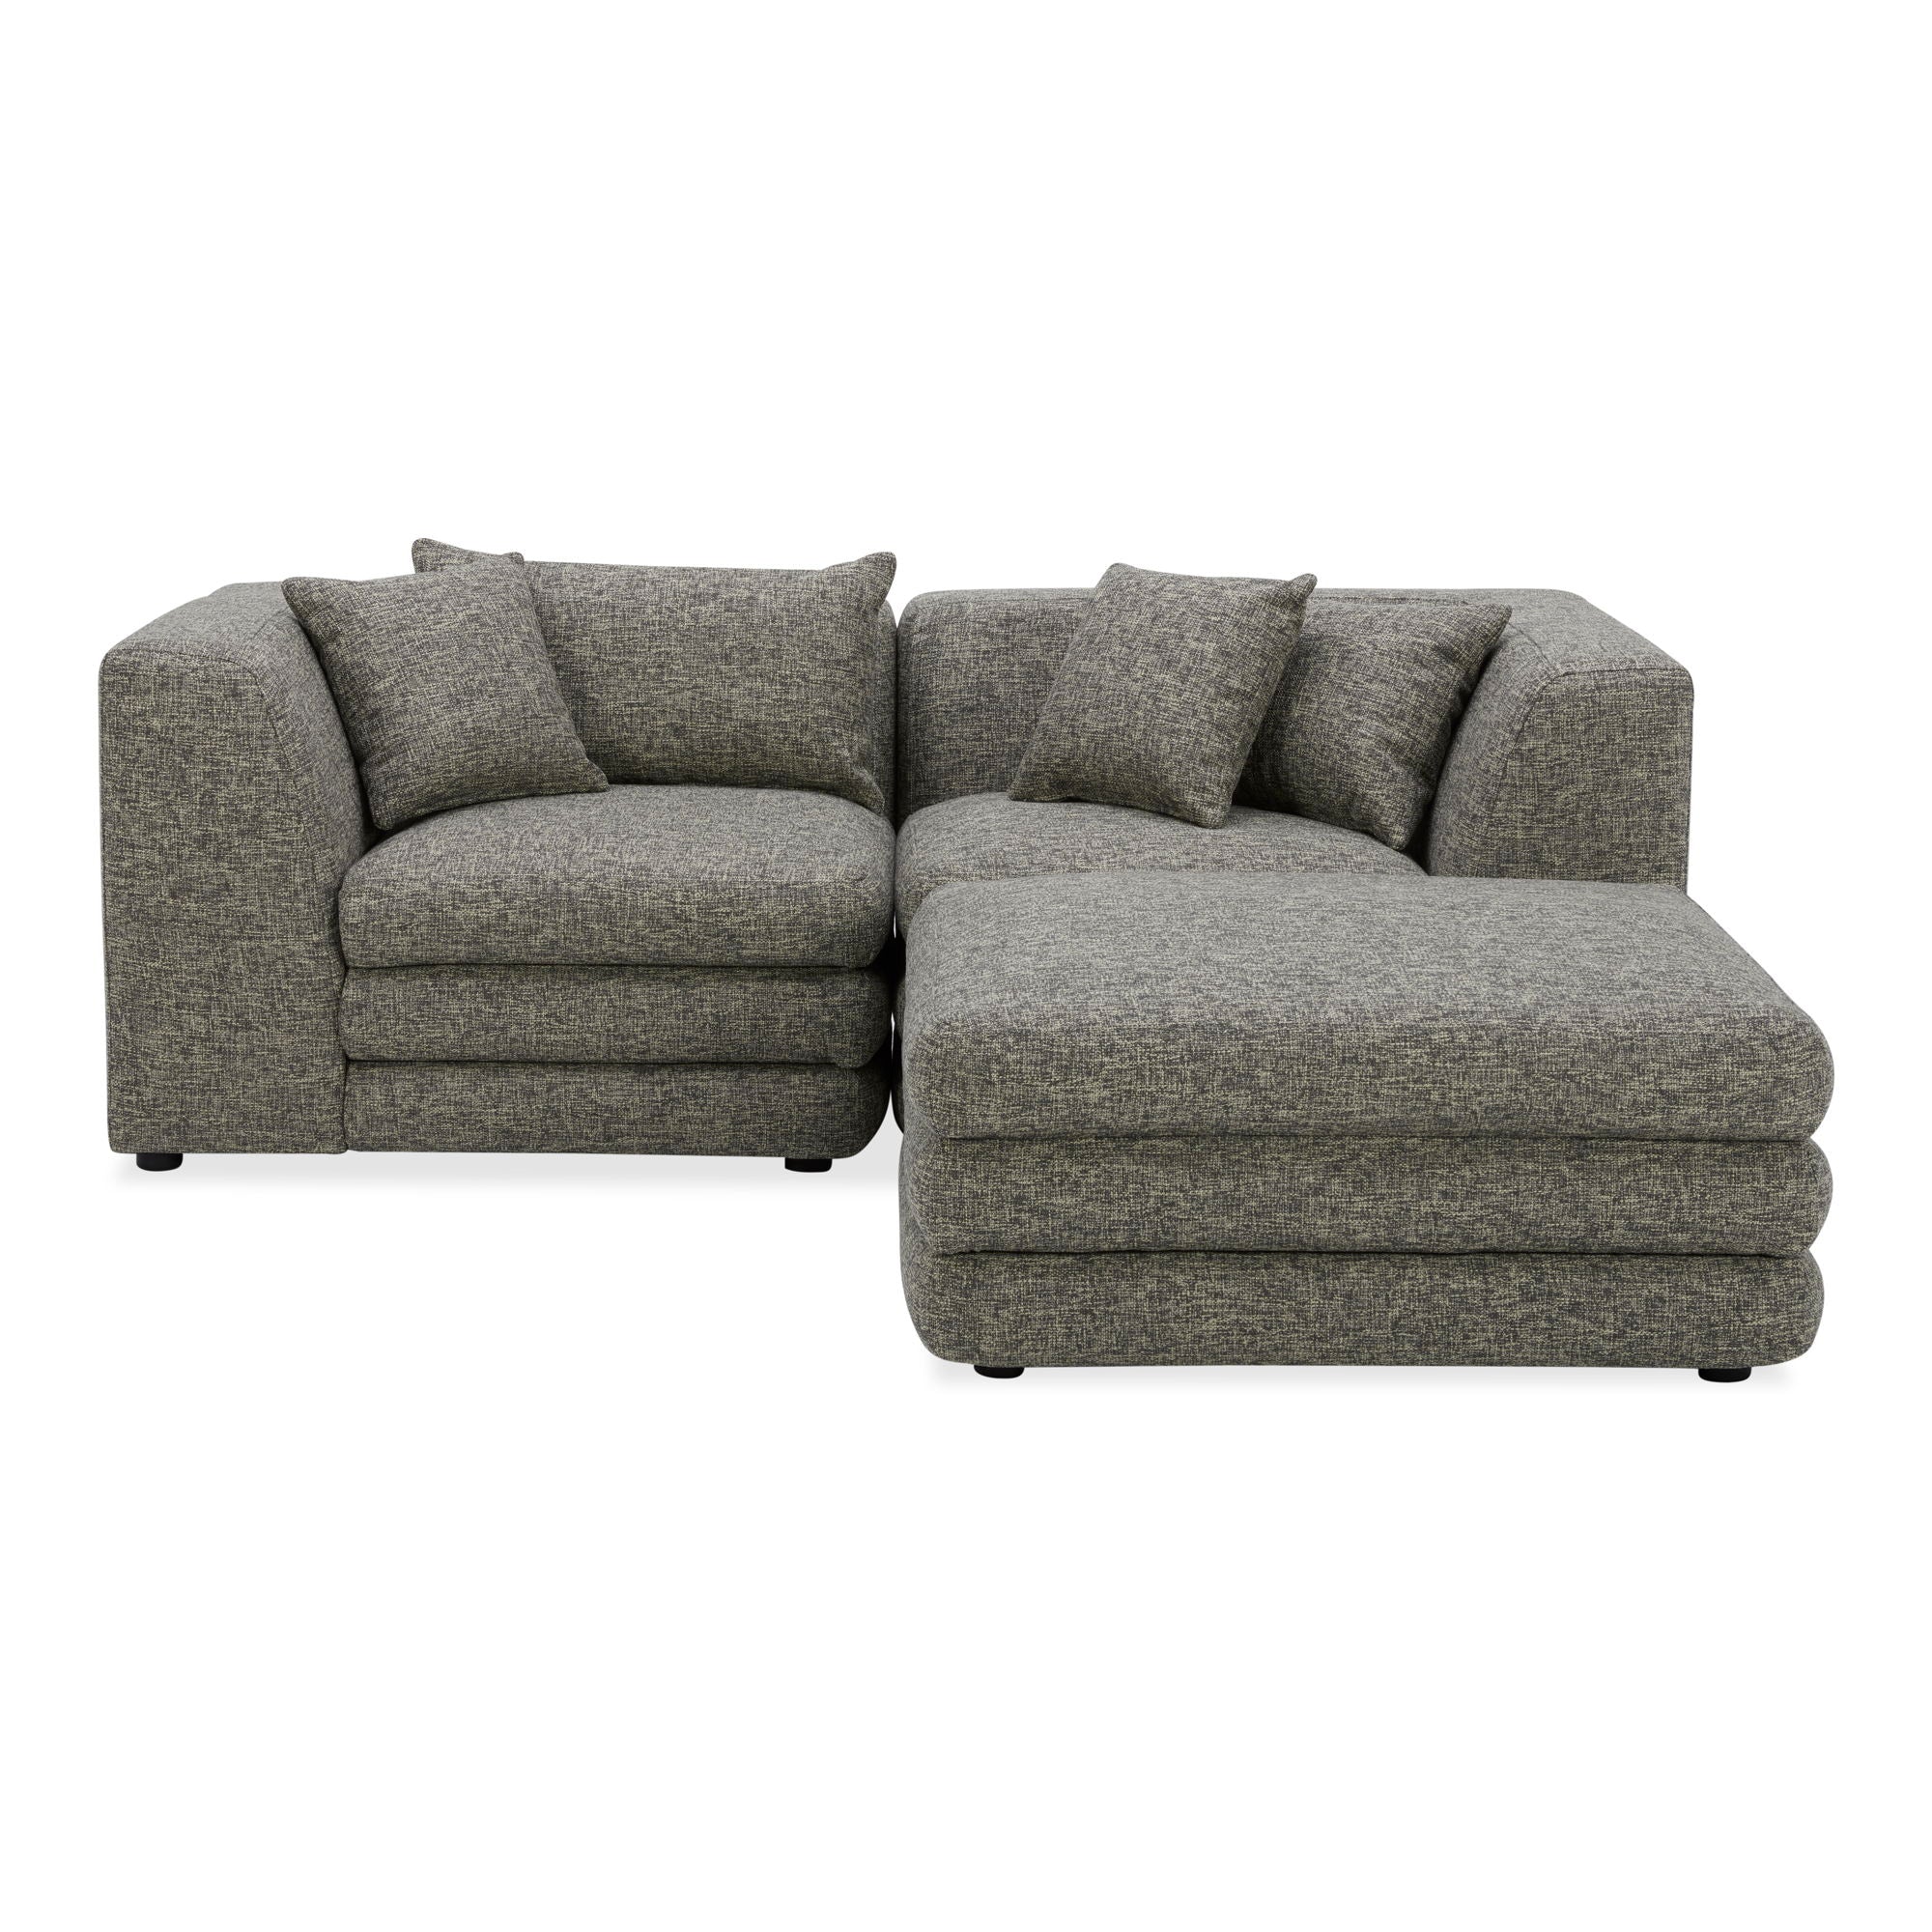 Lowtide - Nook Modular Sectional - Surie Shadow-Stationary Sectionals-American Furniture Outlet